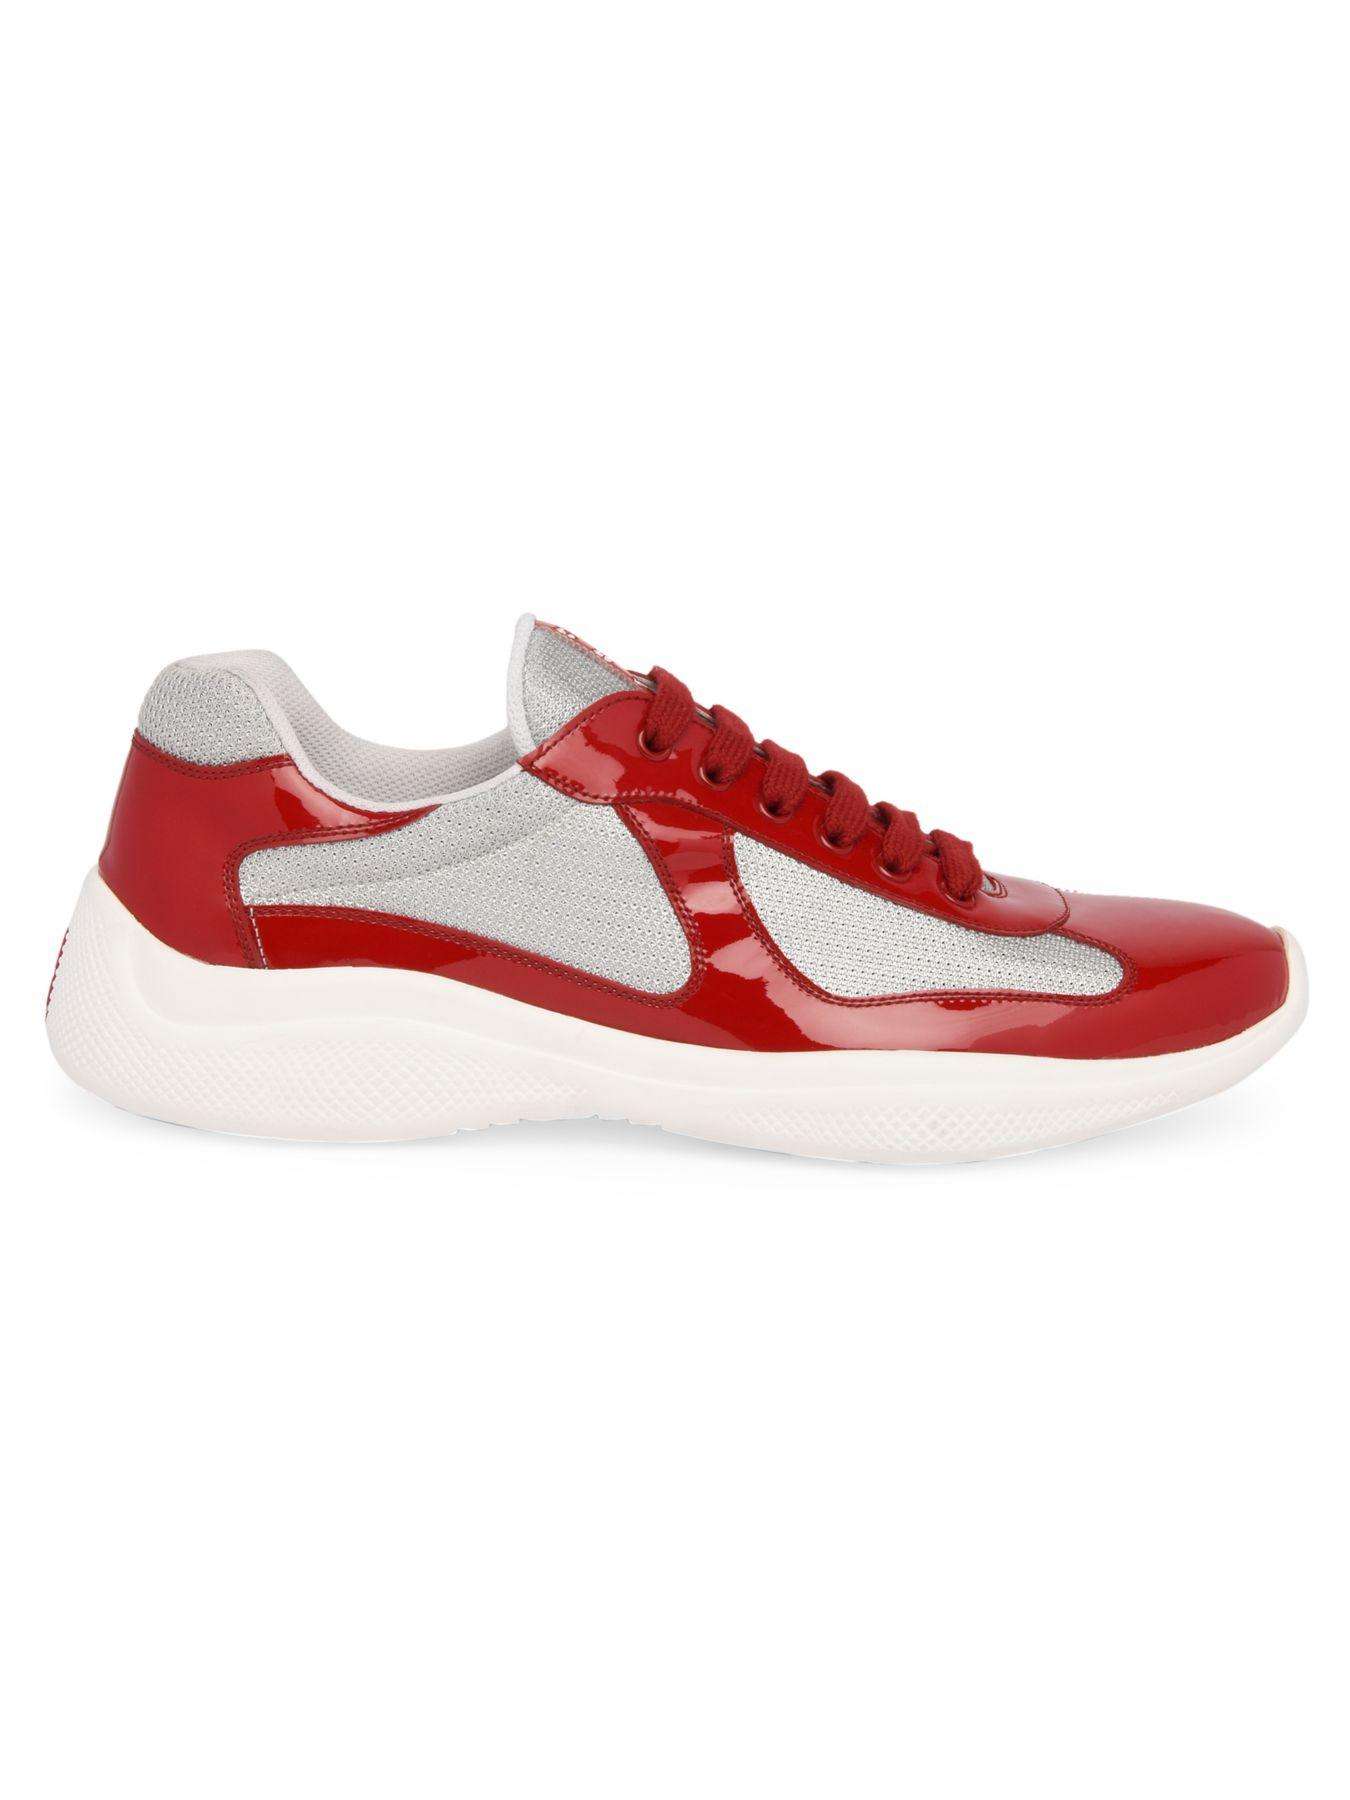 Prada Leather Americas Cup Sneakers in Red for Men